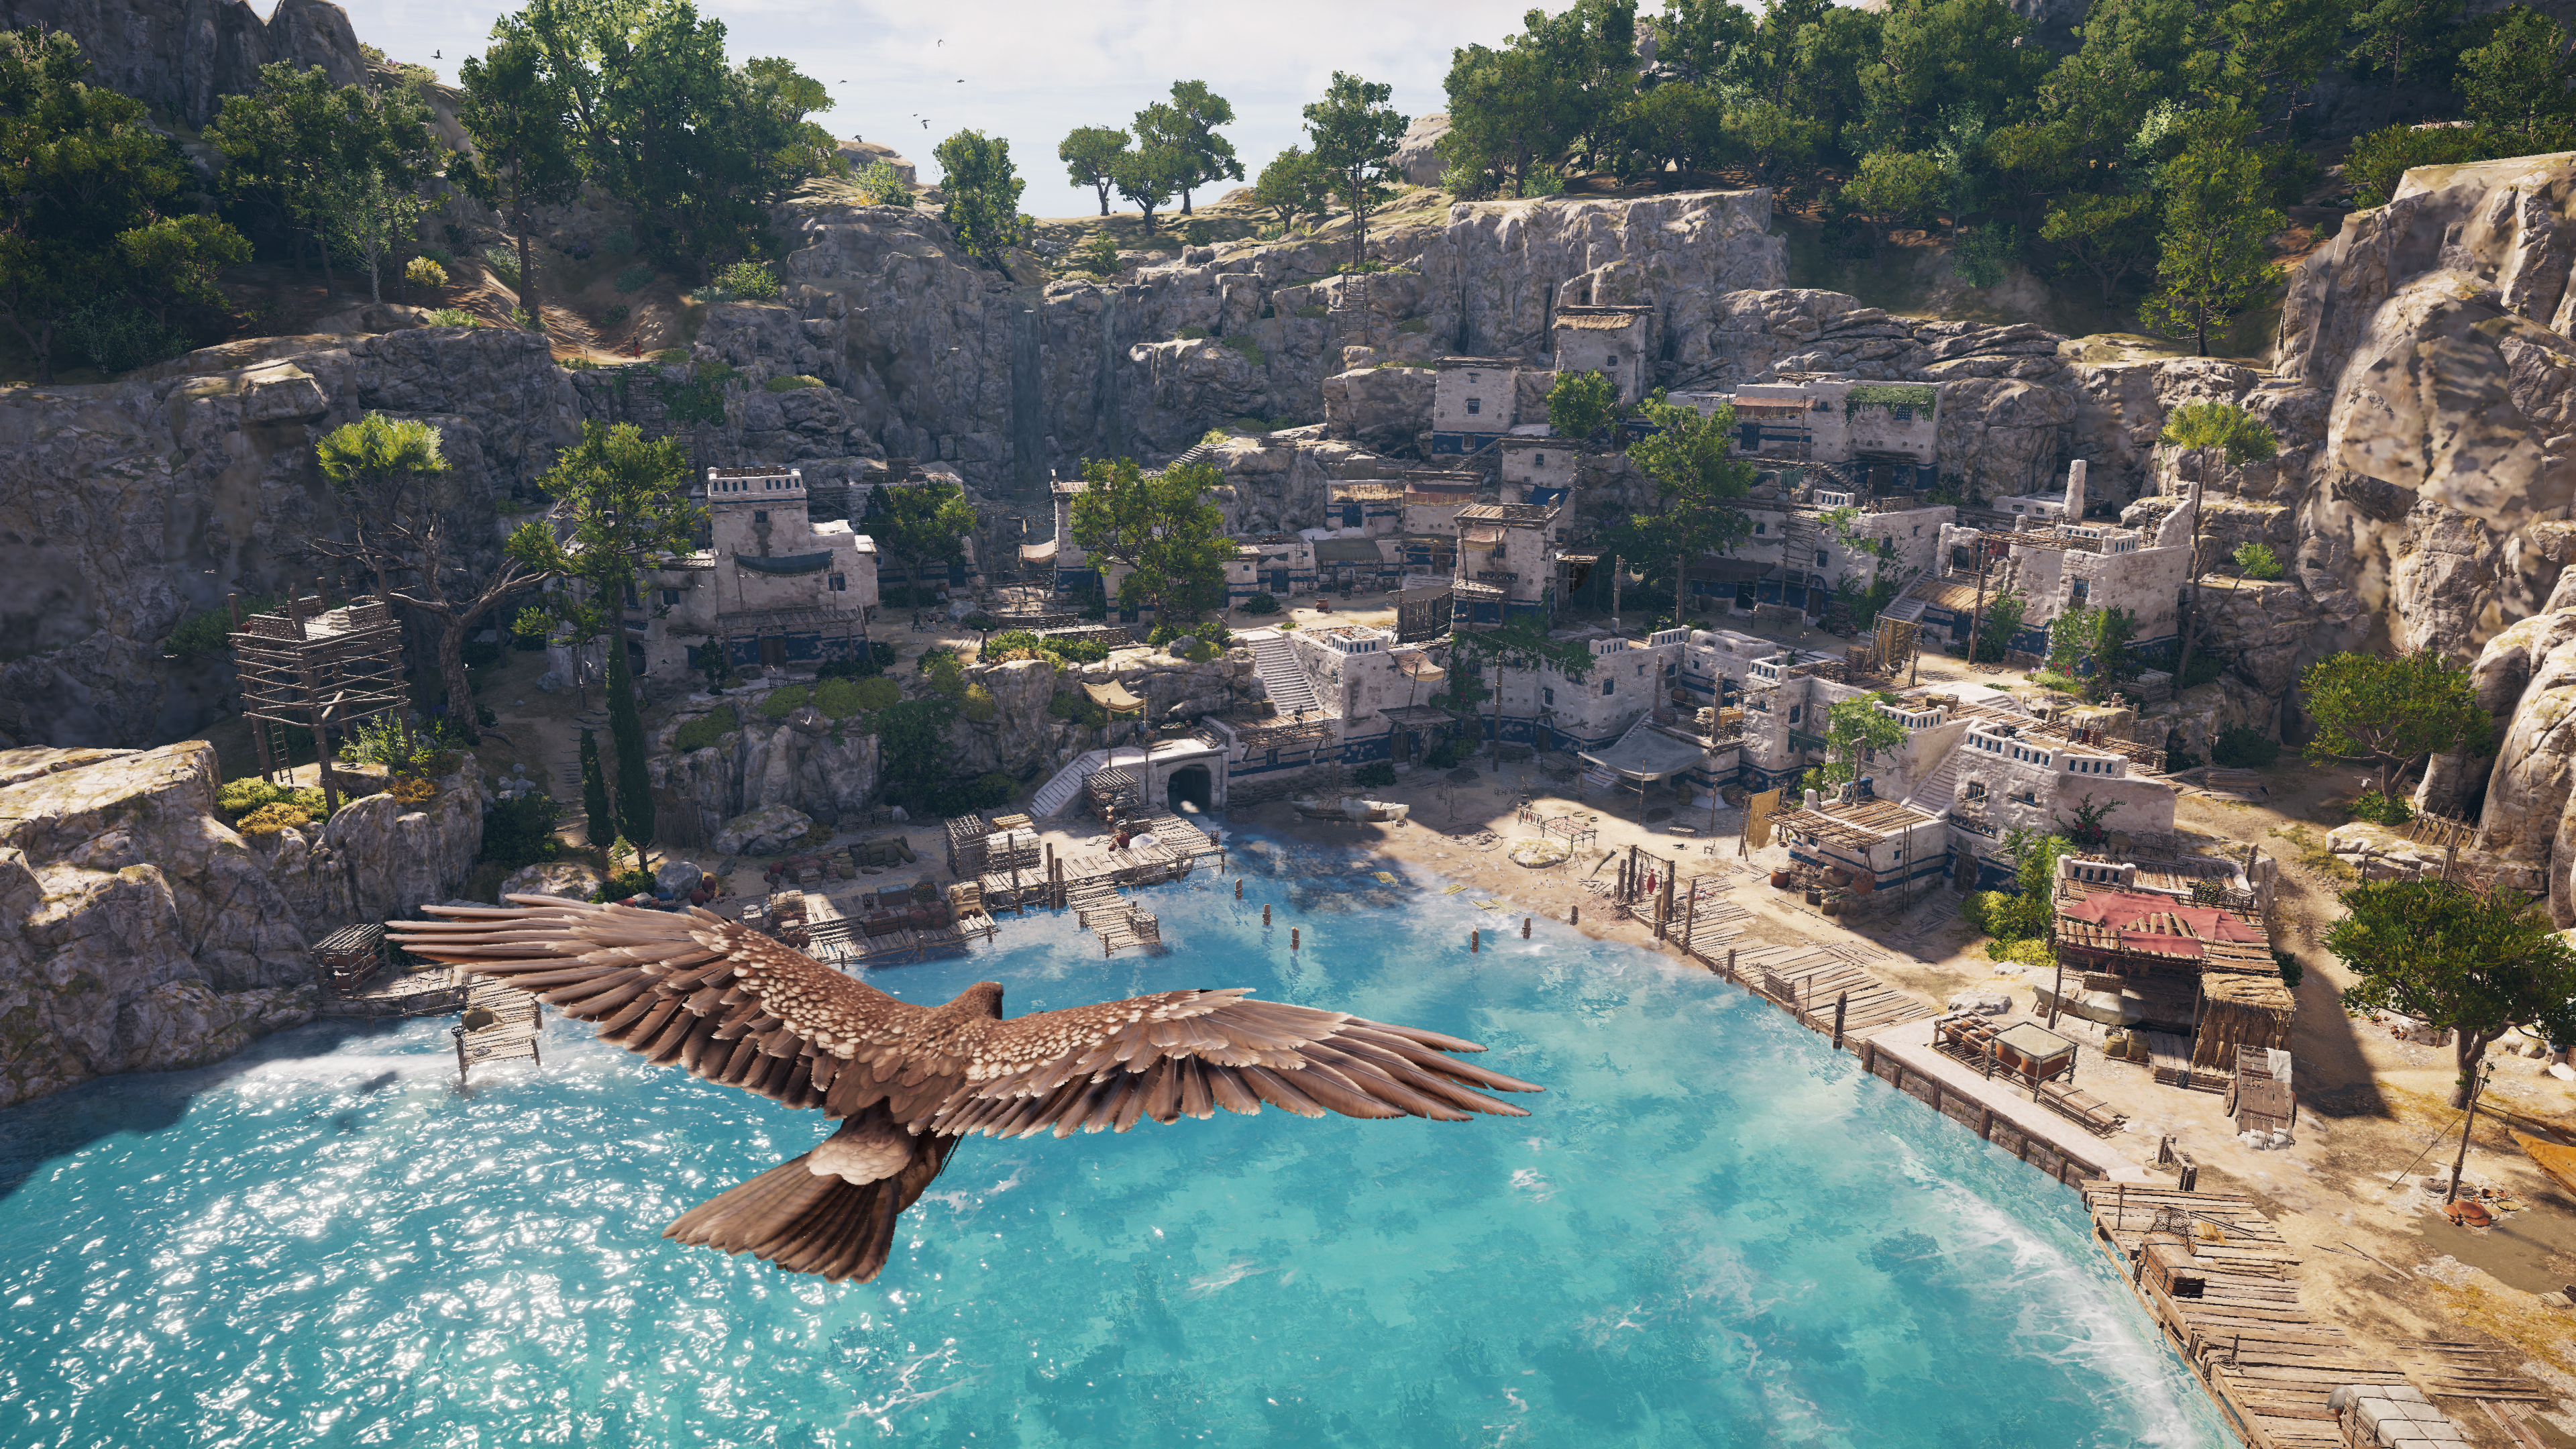 Assassin's Creed Odyssey Preview